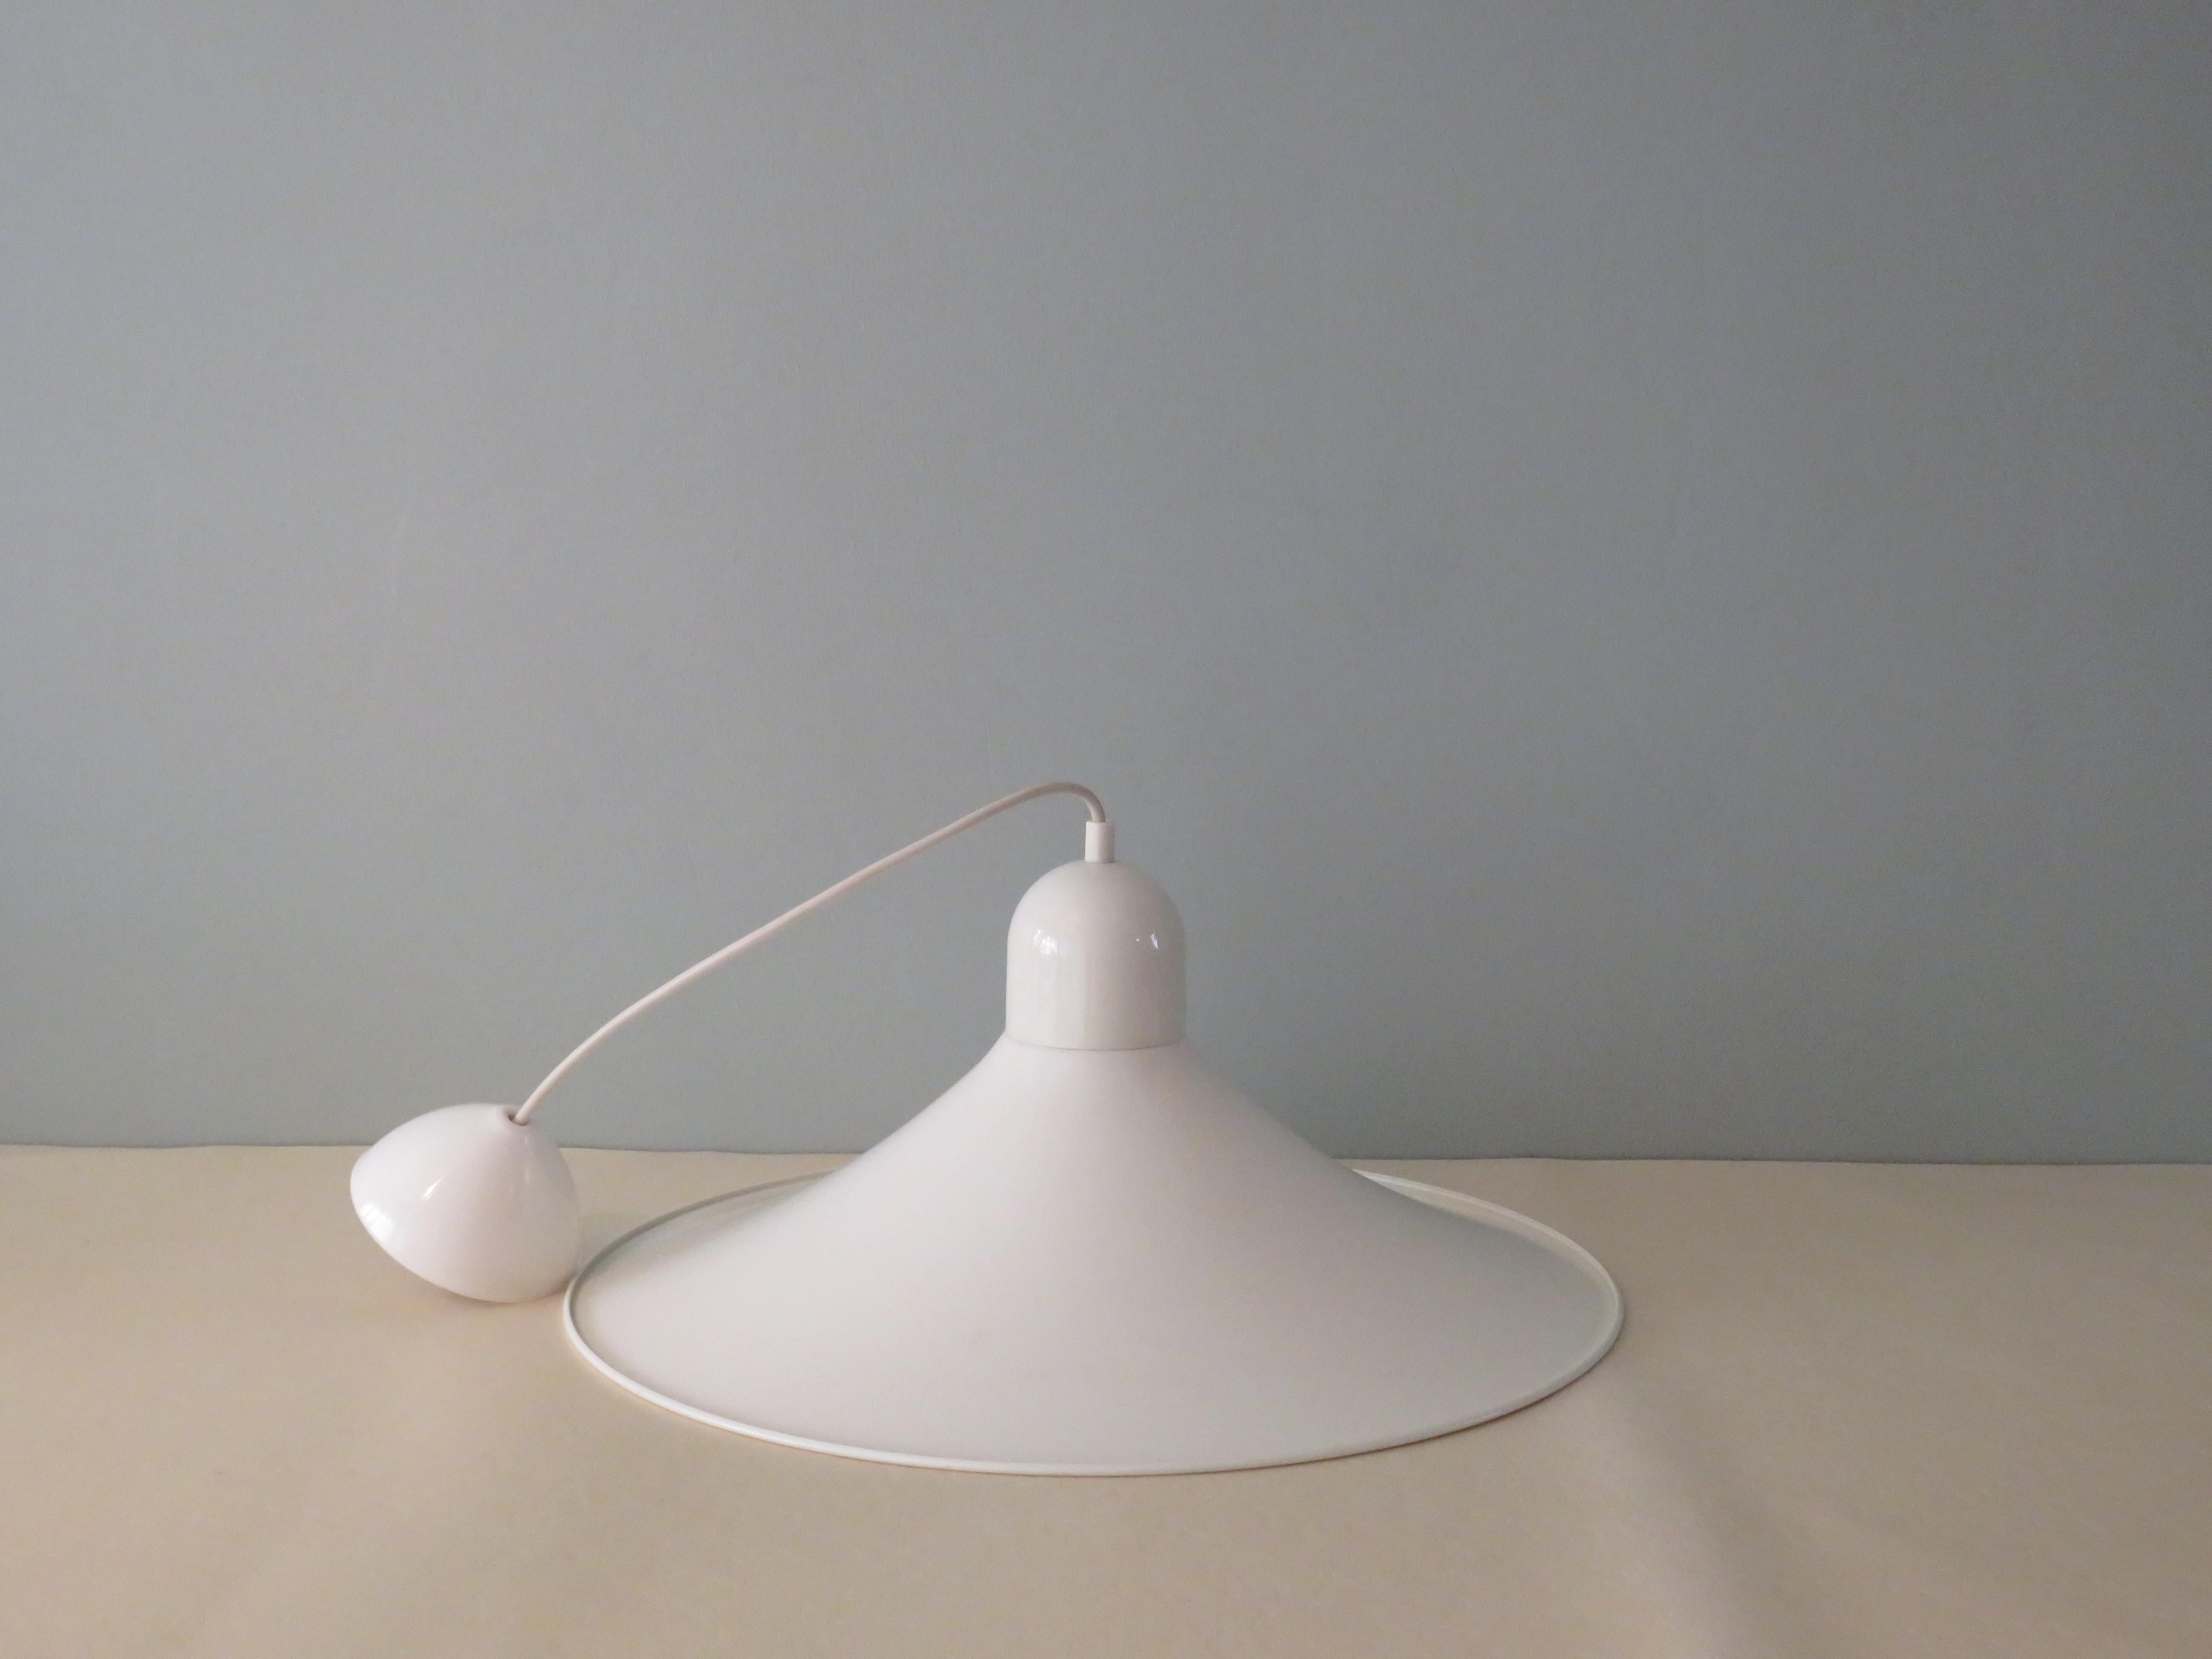 White metal witch hat pendant by Massive Lighting, Belgium 1970-1980.
The item has 1 E 27 fitting and a complete suspension system.
Dimensions H 25 and diameter 47 cm.
Total height, lamp and suspension system 75 cm.
The lamp is in very good